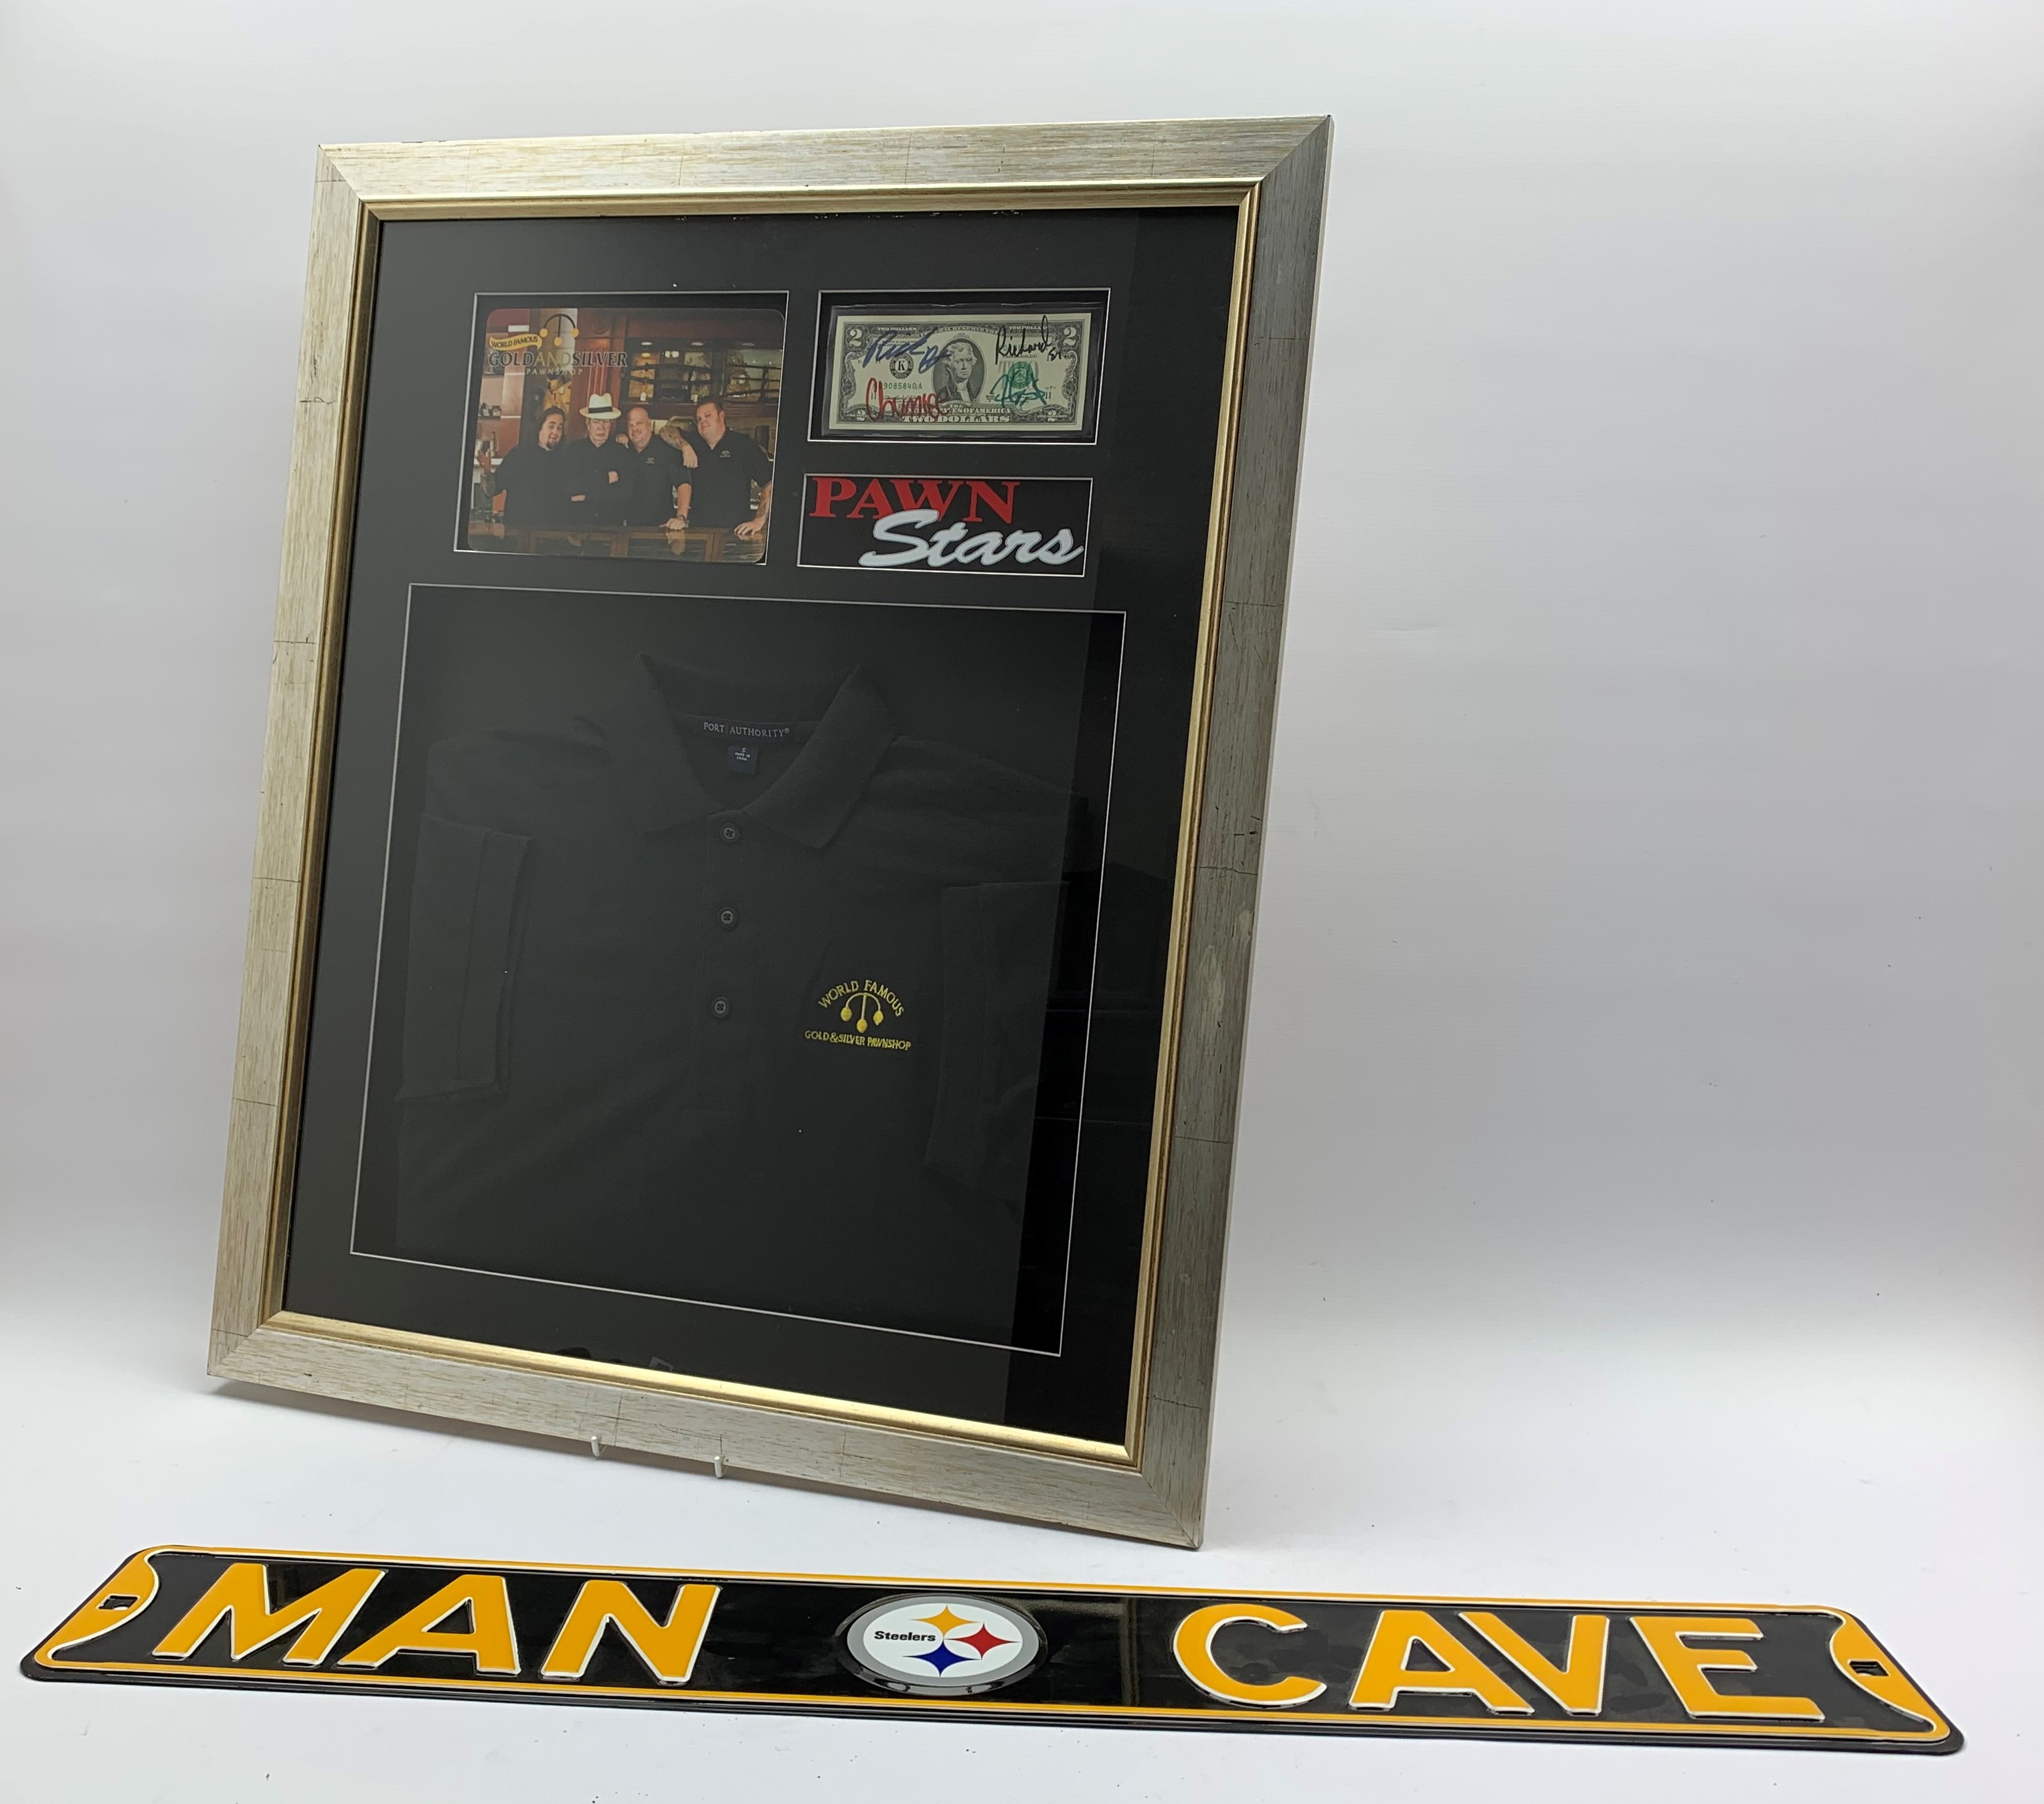 Framed memorabilia from the American TV show 'Pawn Stars' comprising a branded Polo shirt,